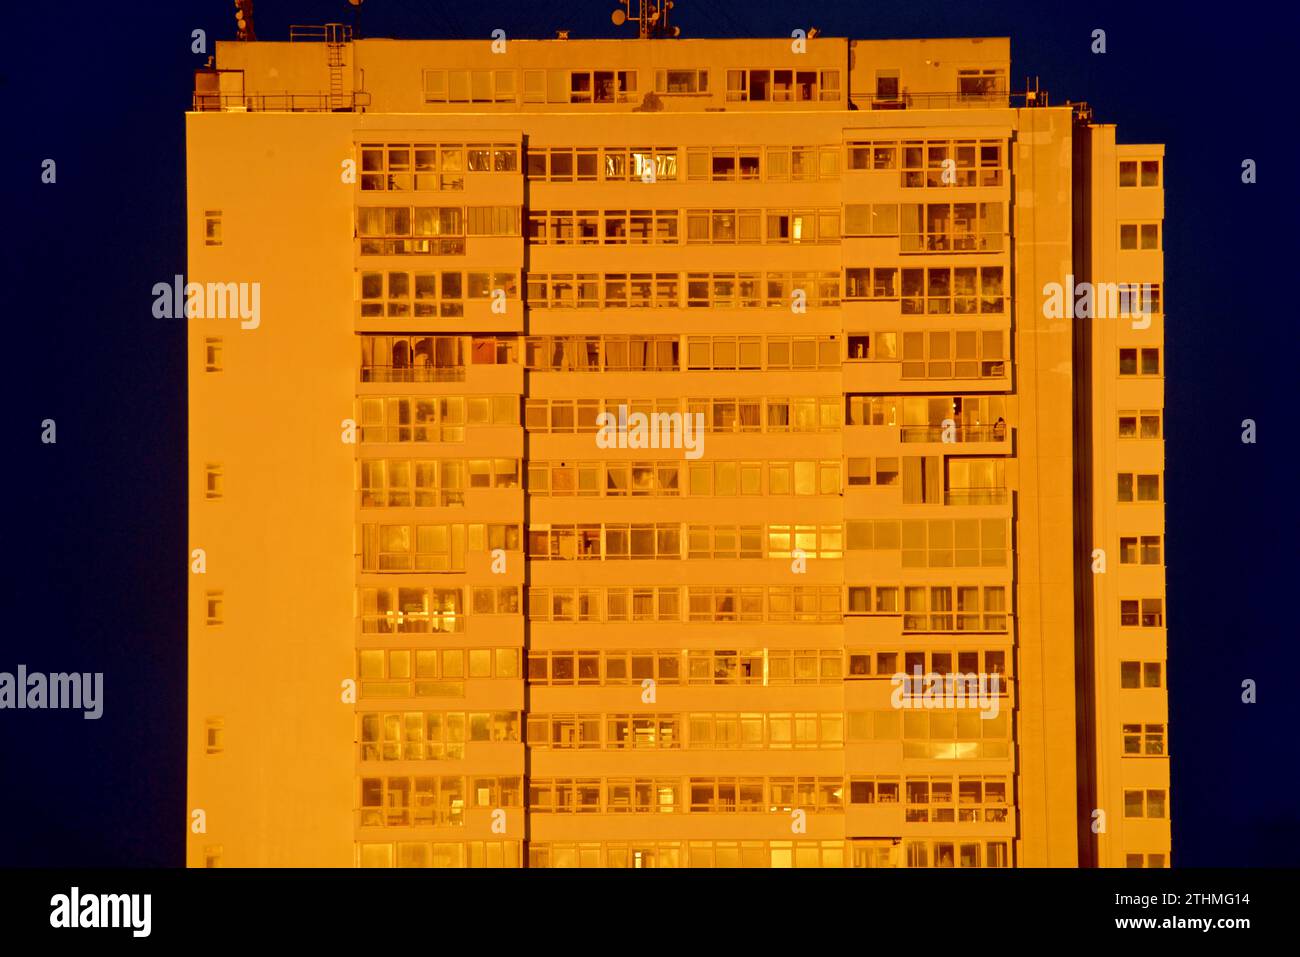 Windows in an apartment building. Sussex Heights, a residential tower block in the centre of Brighton, part of the English city of Brighton and Hove. Built between 1966 and 1968 it rises to 334 feet. Stock Photo